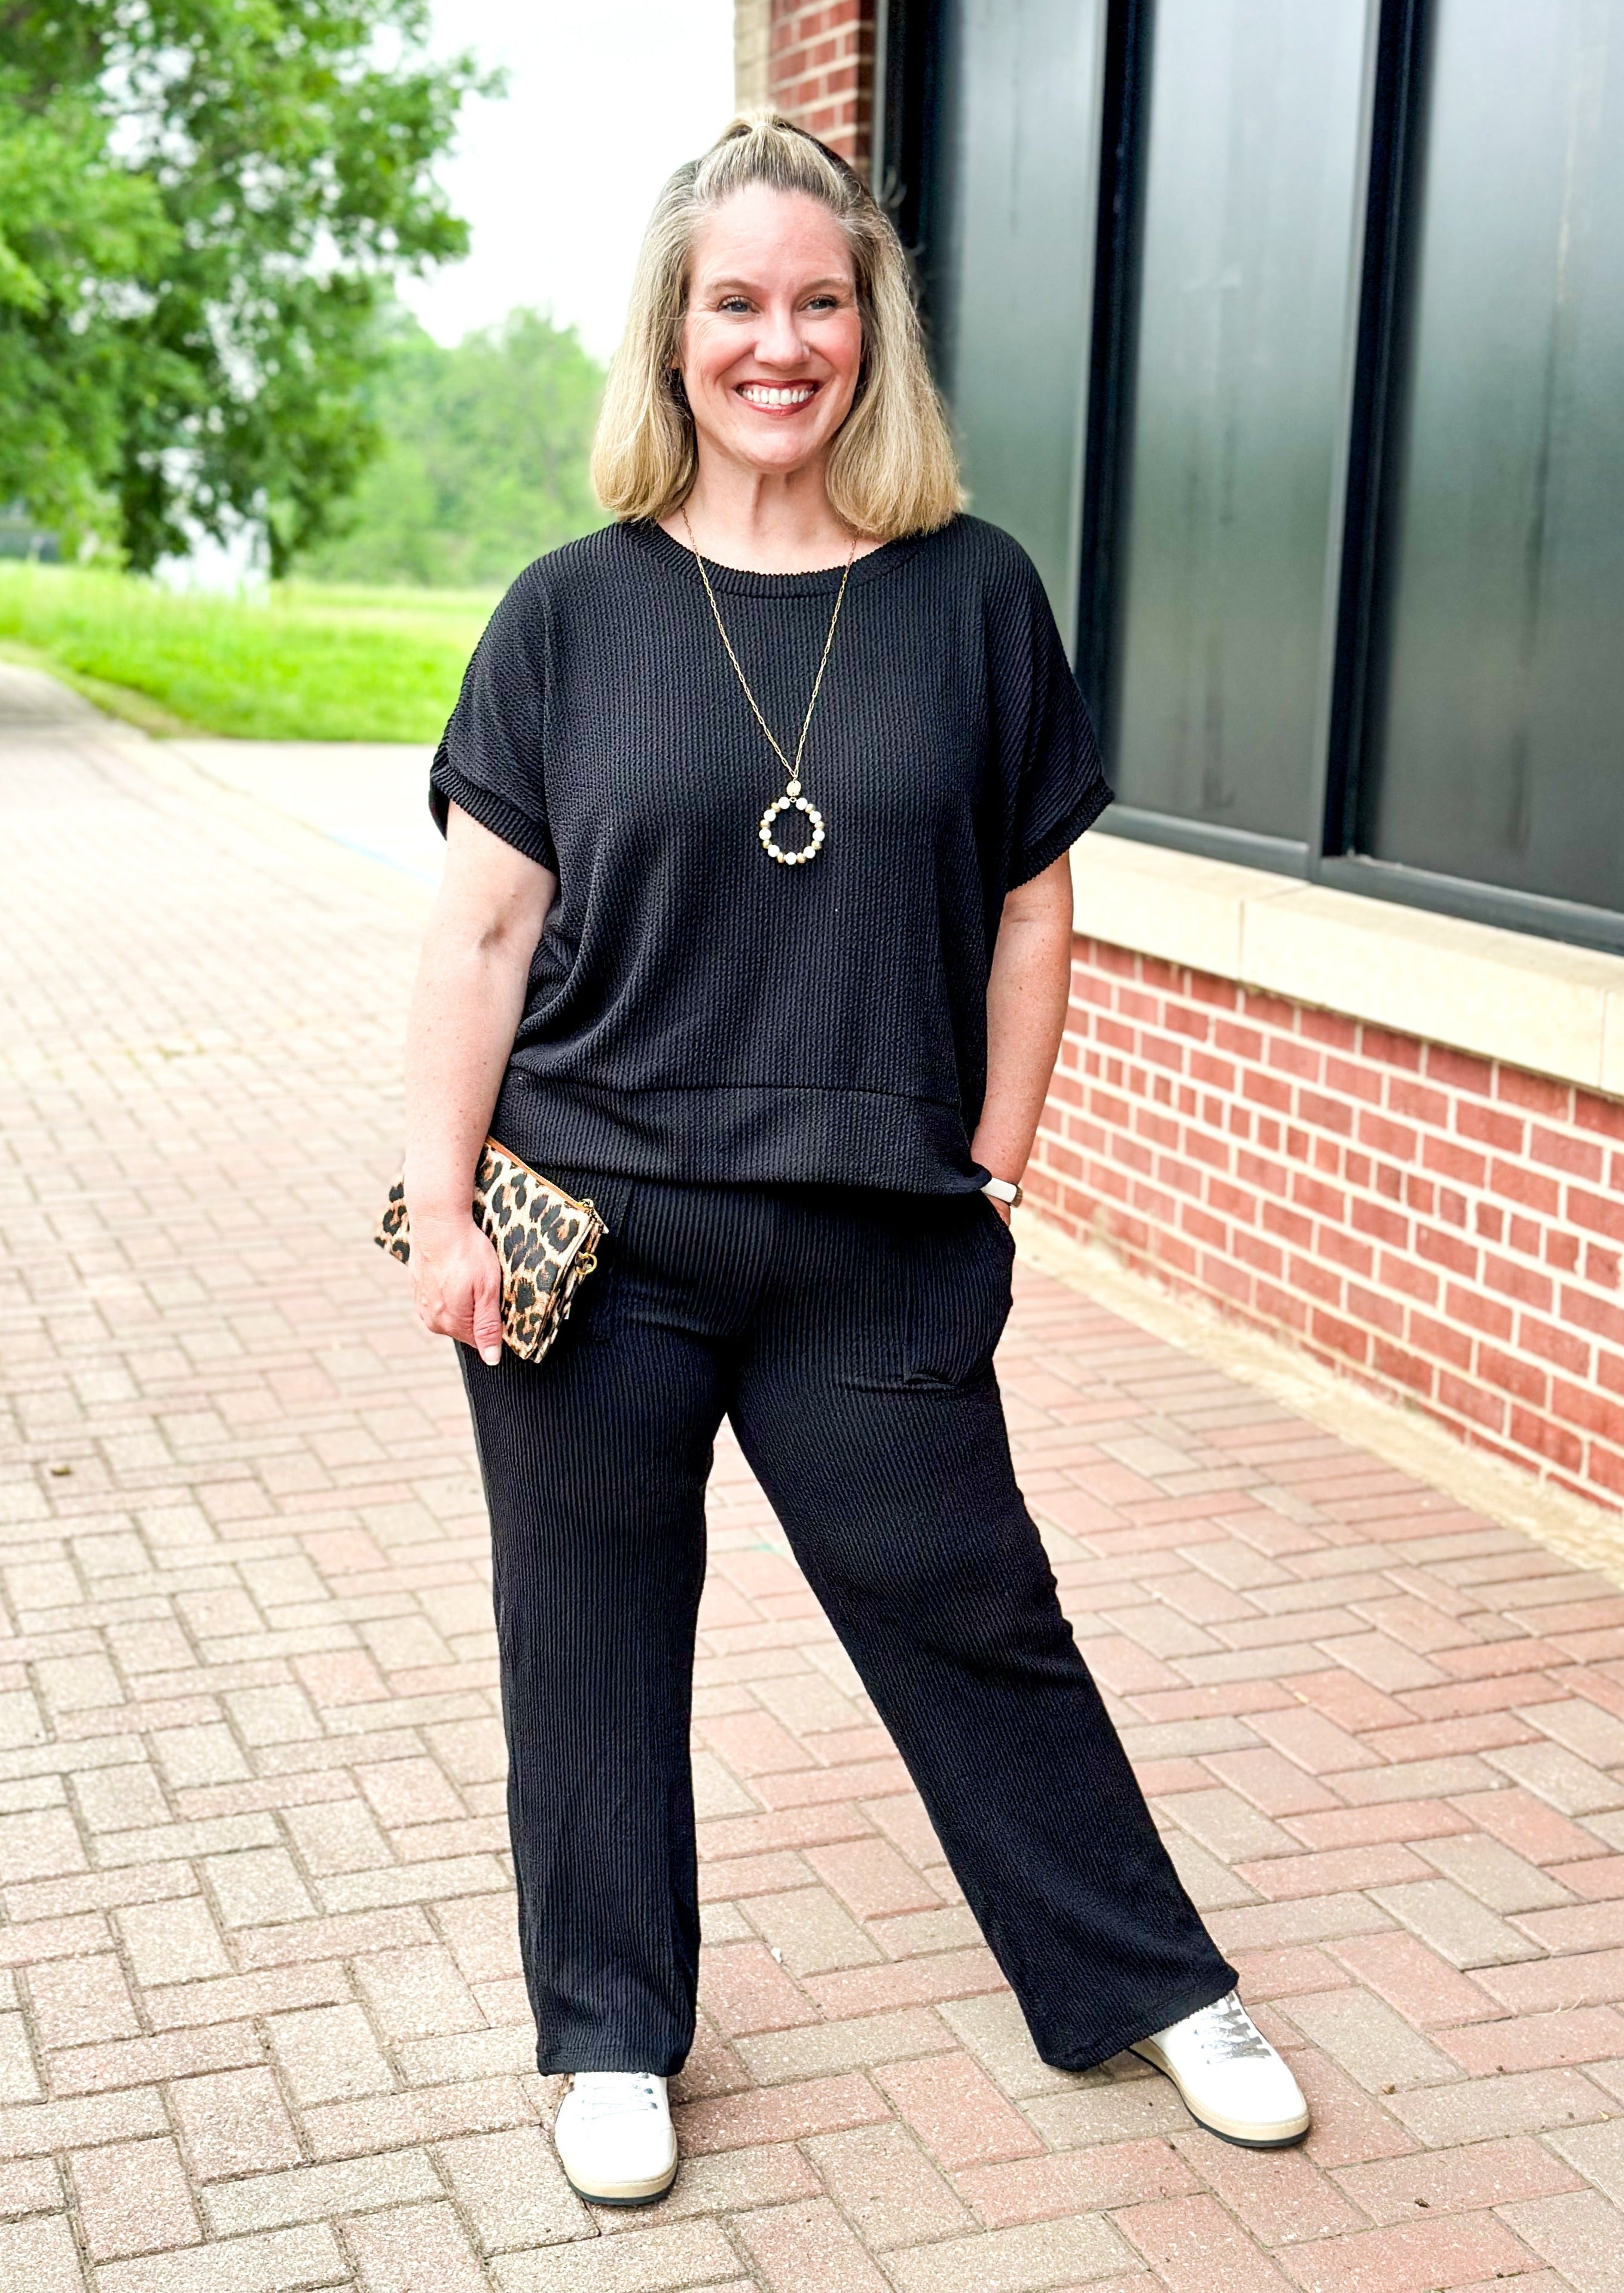 textured black set top and pants - pants have pockets and banded waist - top has a drop shoulder dolman sleeve with banding around the bottom.